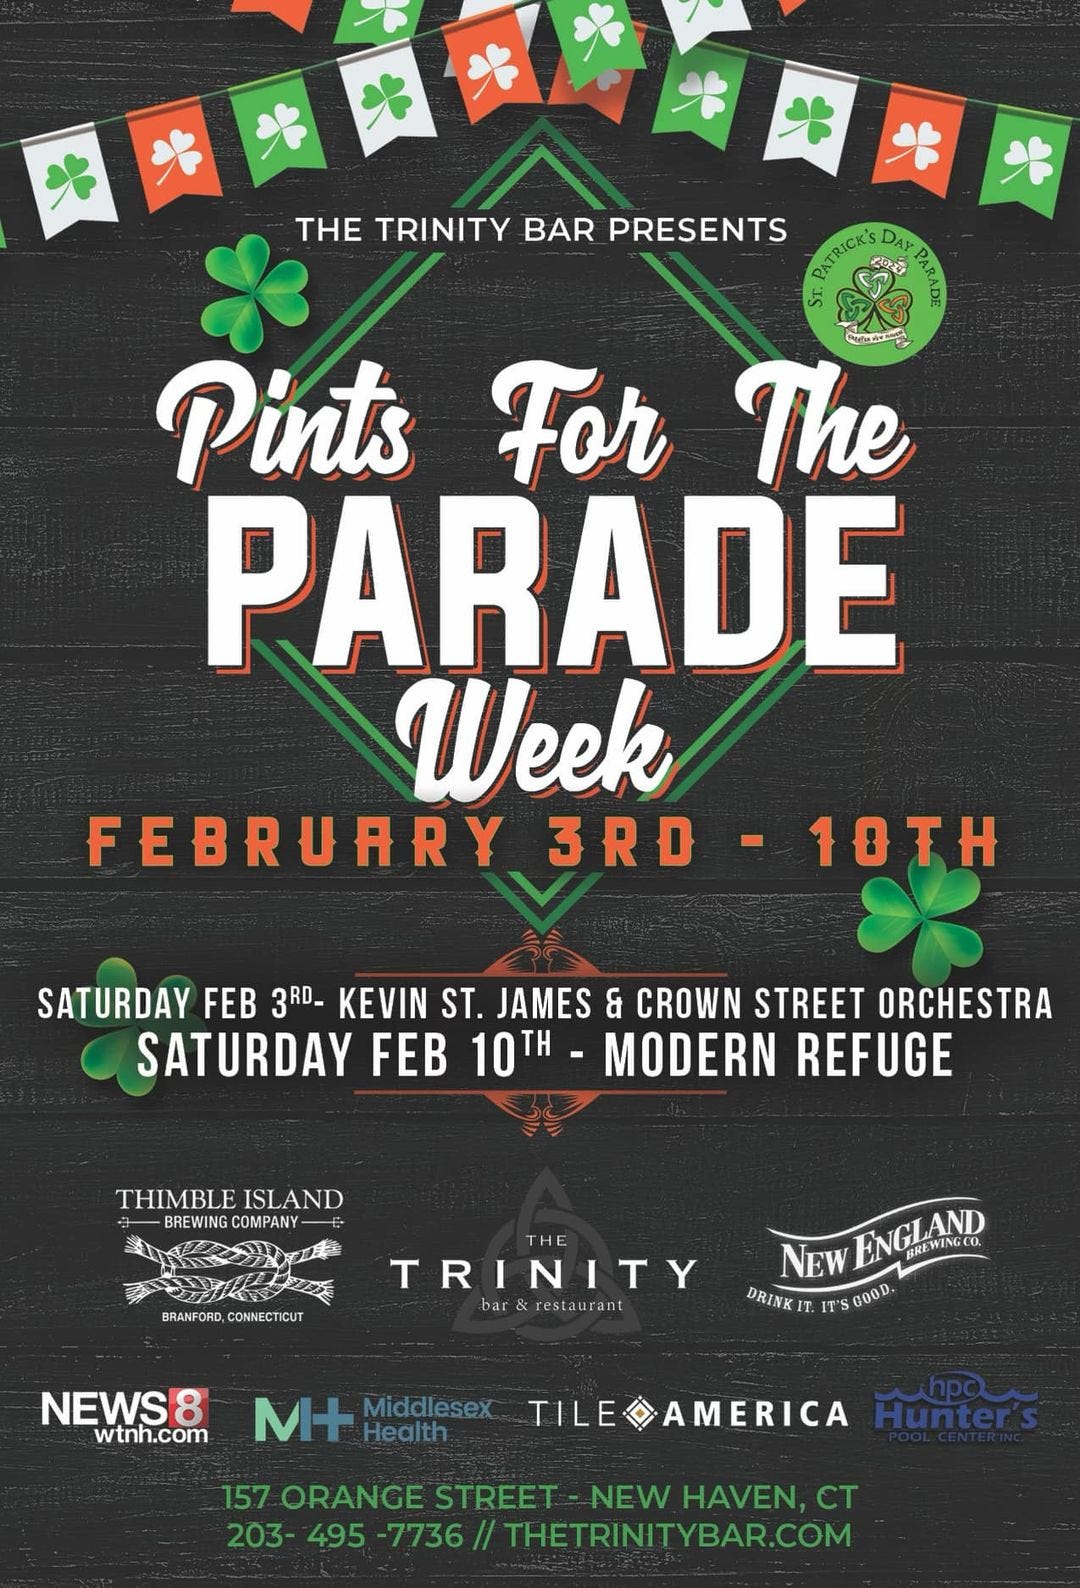 May be an image of text that says 'THE TRINITY BAR PRESENTS DAY Pints For The PARADE Week FEBRUARY 3RD -10TH SATURDAY FEB 3RD- KEVIN ST. JAMES & CROWN STREET ORCHESTRA SATURDAY FEB 10TH MODERN REFUGE THIMBLE ISLAND BREWINGCMP CONNECTICUT TRINITY b&resturant GLAN ENGLAND BREWING.CO. NEW DRINT NEWS8 wtnh.com M+ Middlesex Health TILEAMERICA Hunter's 157 ORANGE STREET NEW HAVEN, CT 203- 495 -7736 THETRINITYBAR.COM'